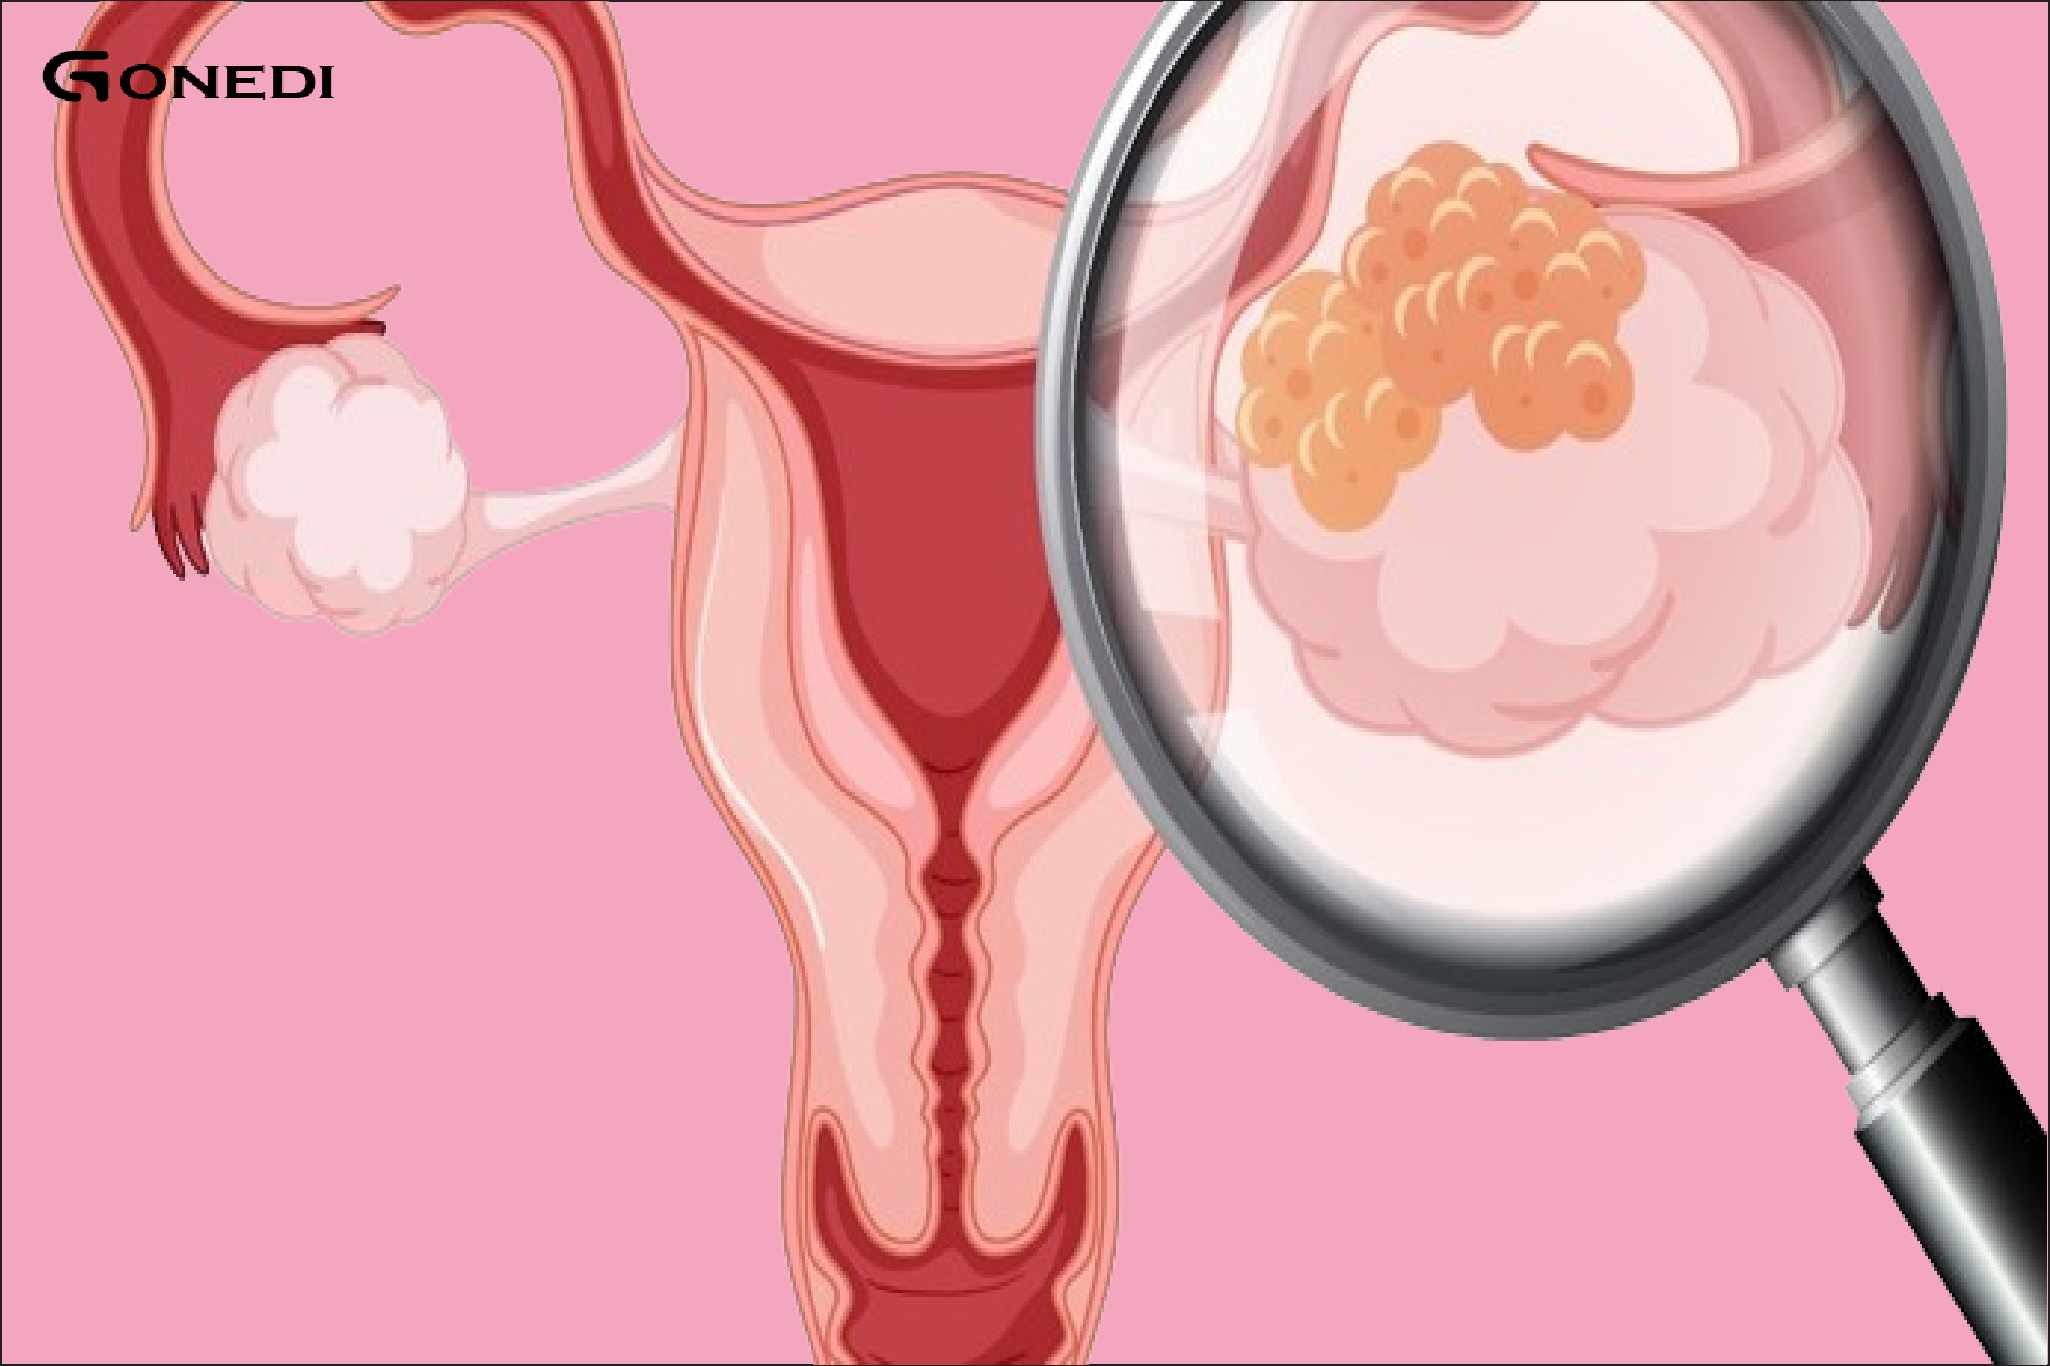 Early warning signs of ovarian cancer every woman should know